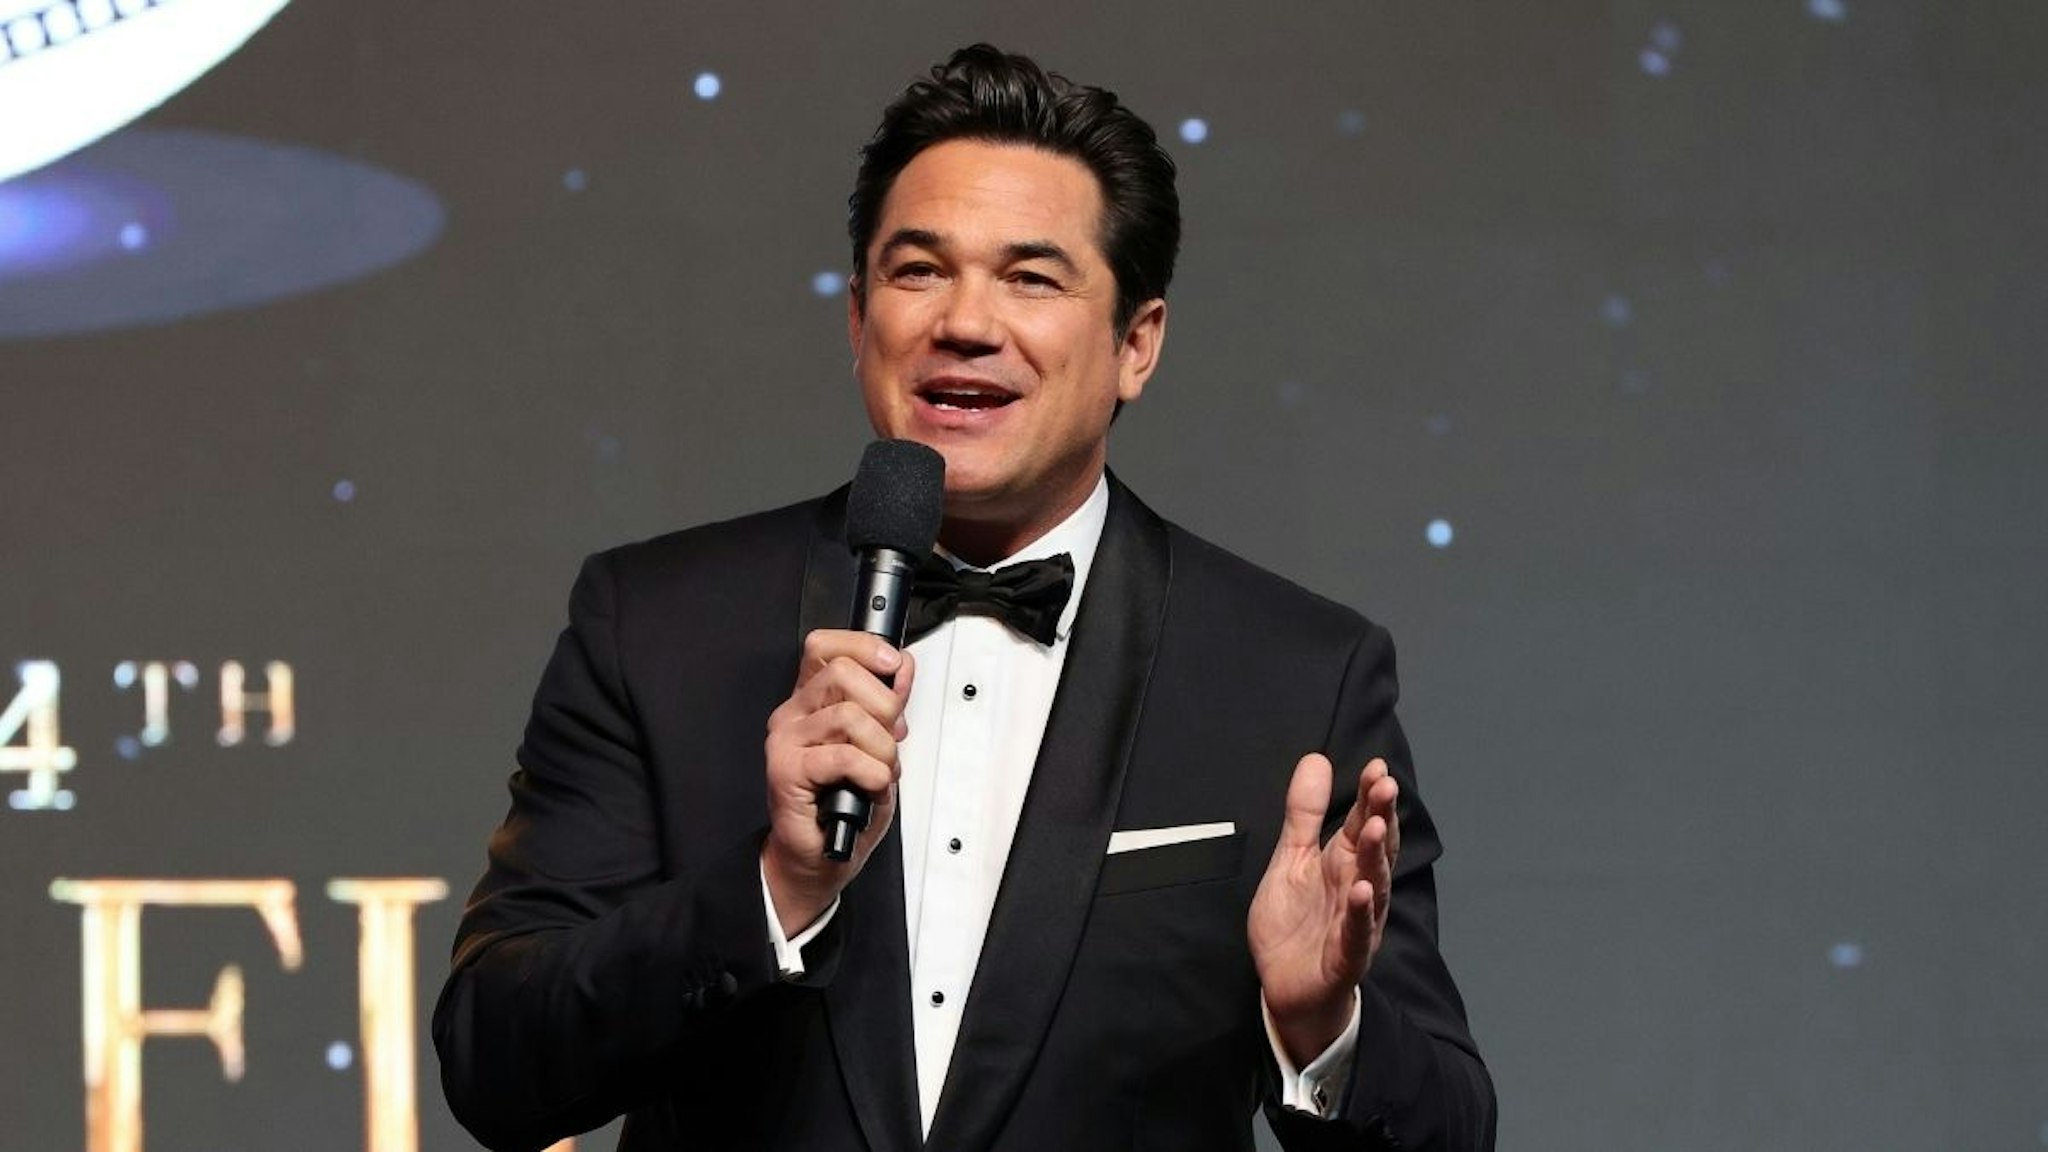 Host Dean Cain speaks onstage during the 24th Family Film Awards at Hilton Los Angeles/Universal City on March 24, 2021 in Universal City, California.